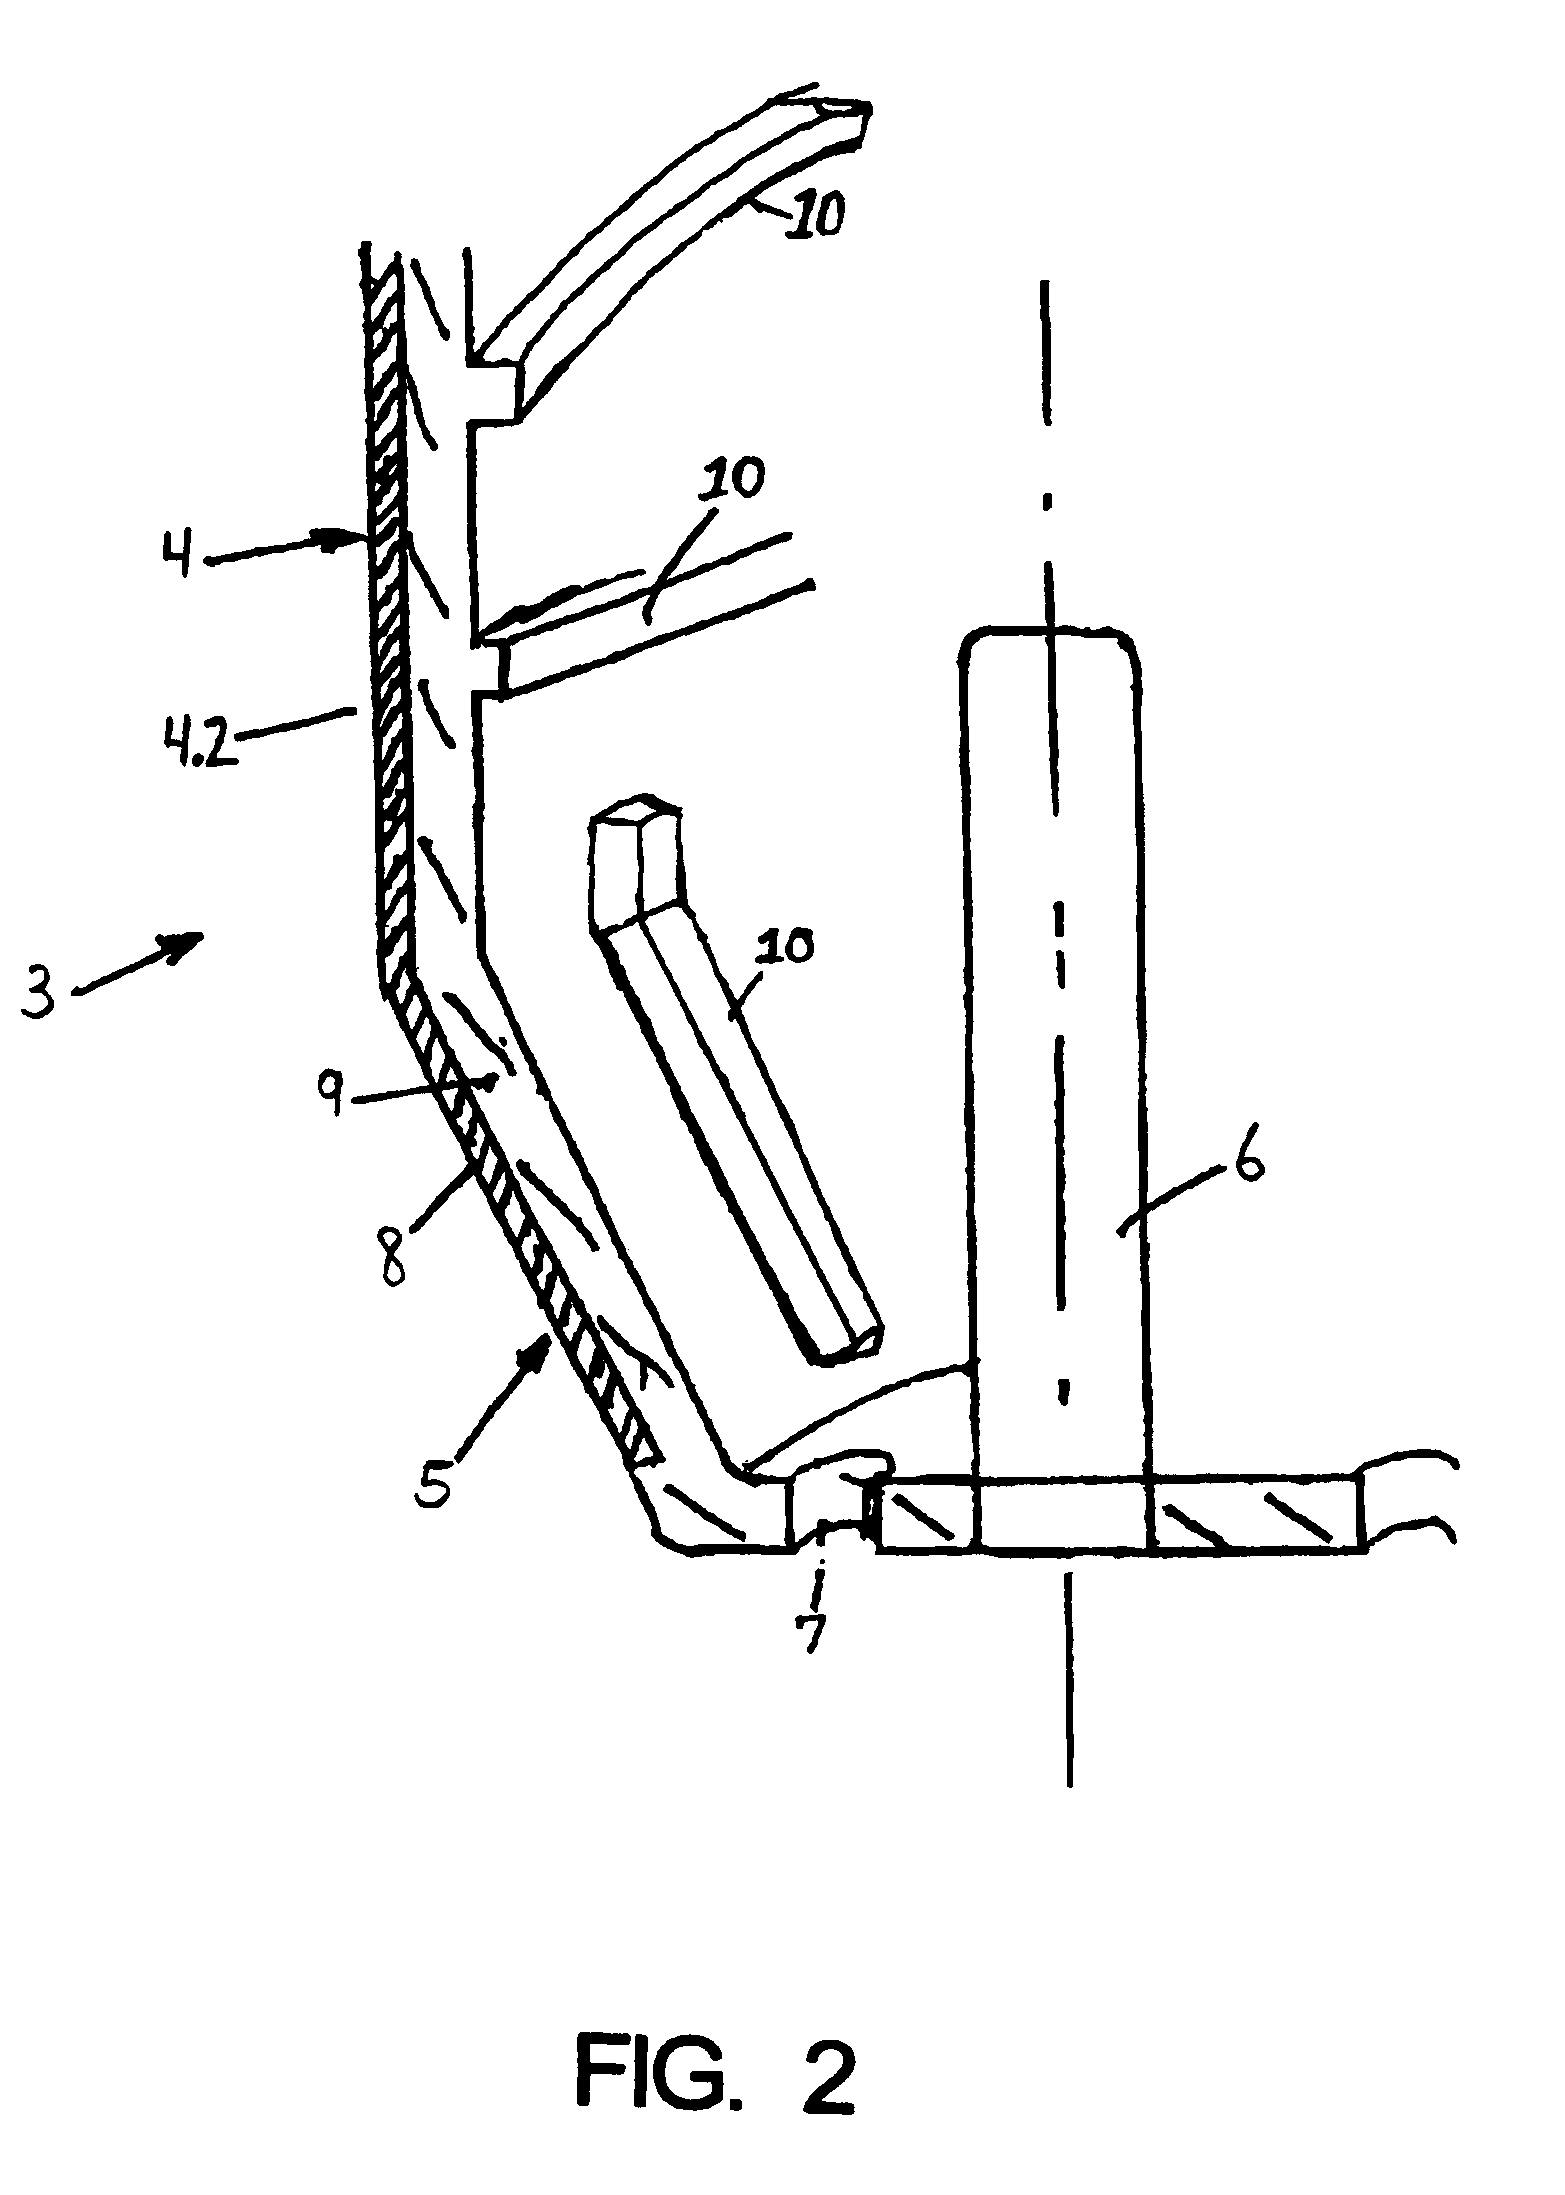 Beverage bottling plant configured to fill already used, returned, returnable beverage bottles which includes a cleaning machine, and a cleaning machine